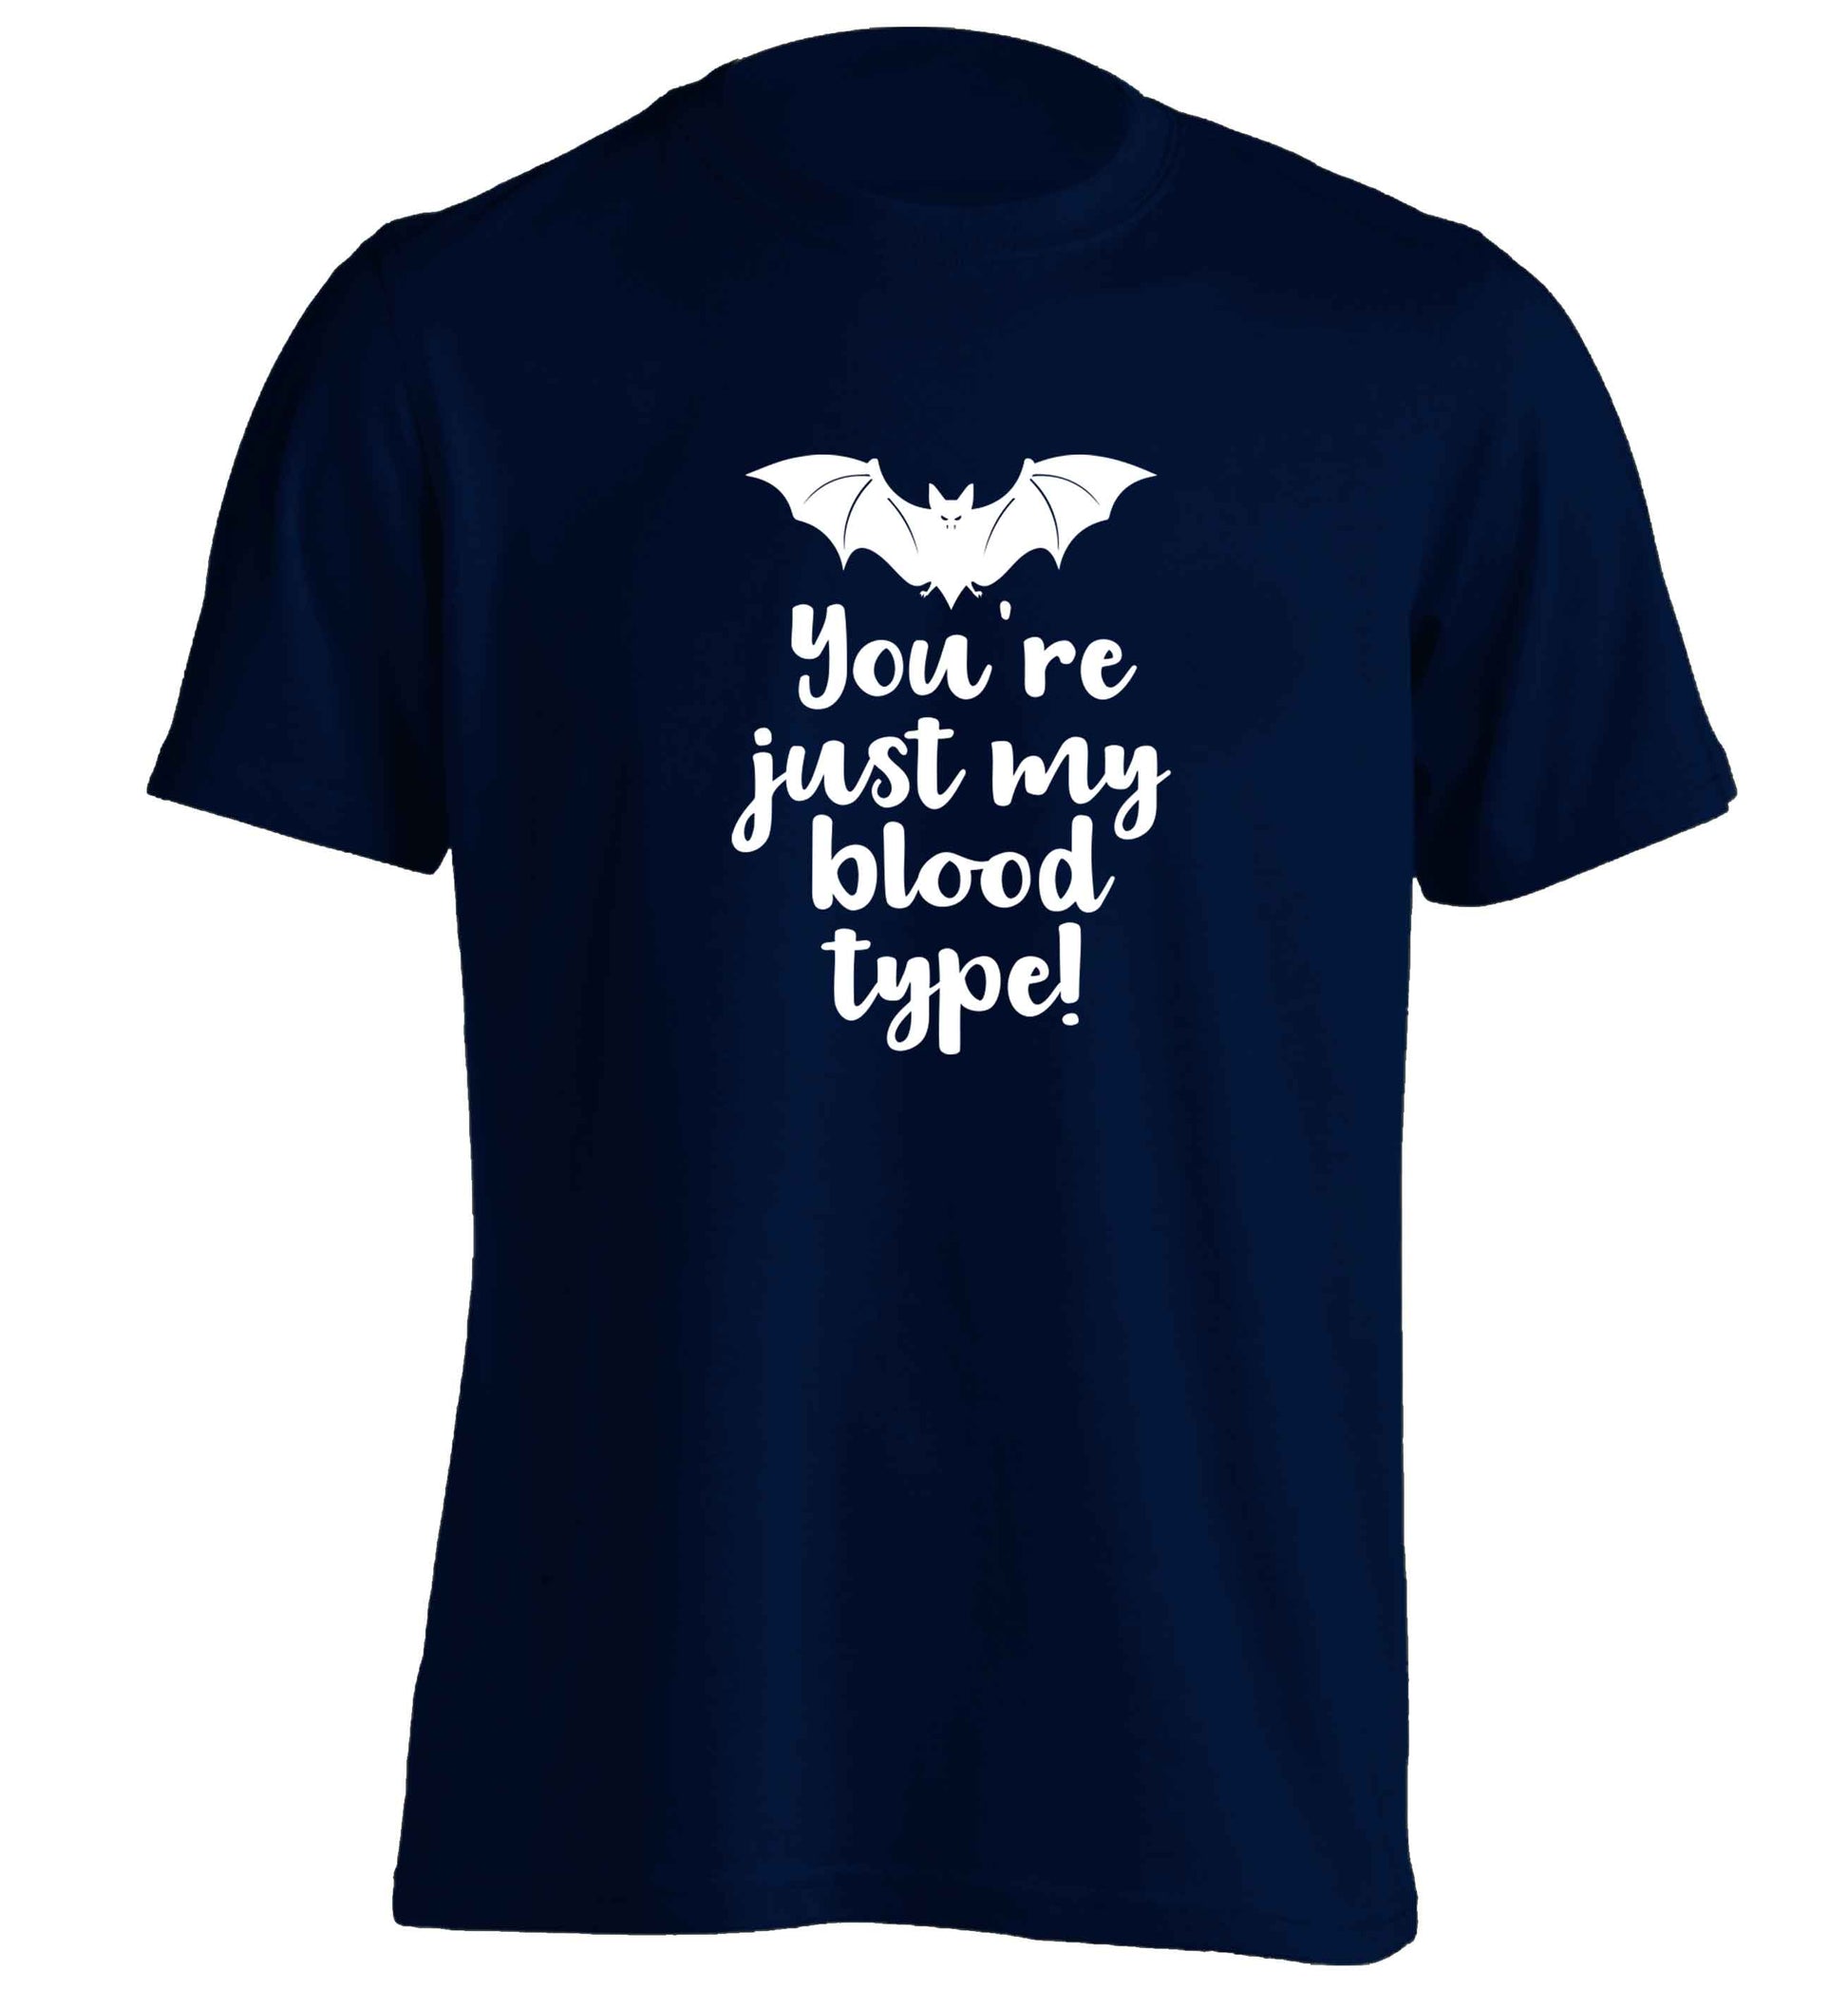 You're just my blood type adults unisex navy Tshirt 2XL